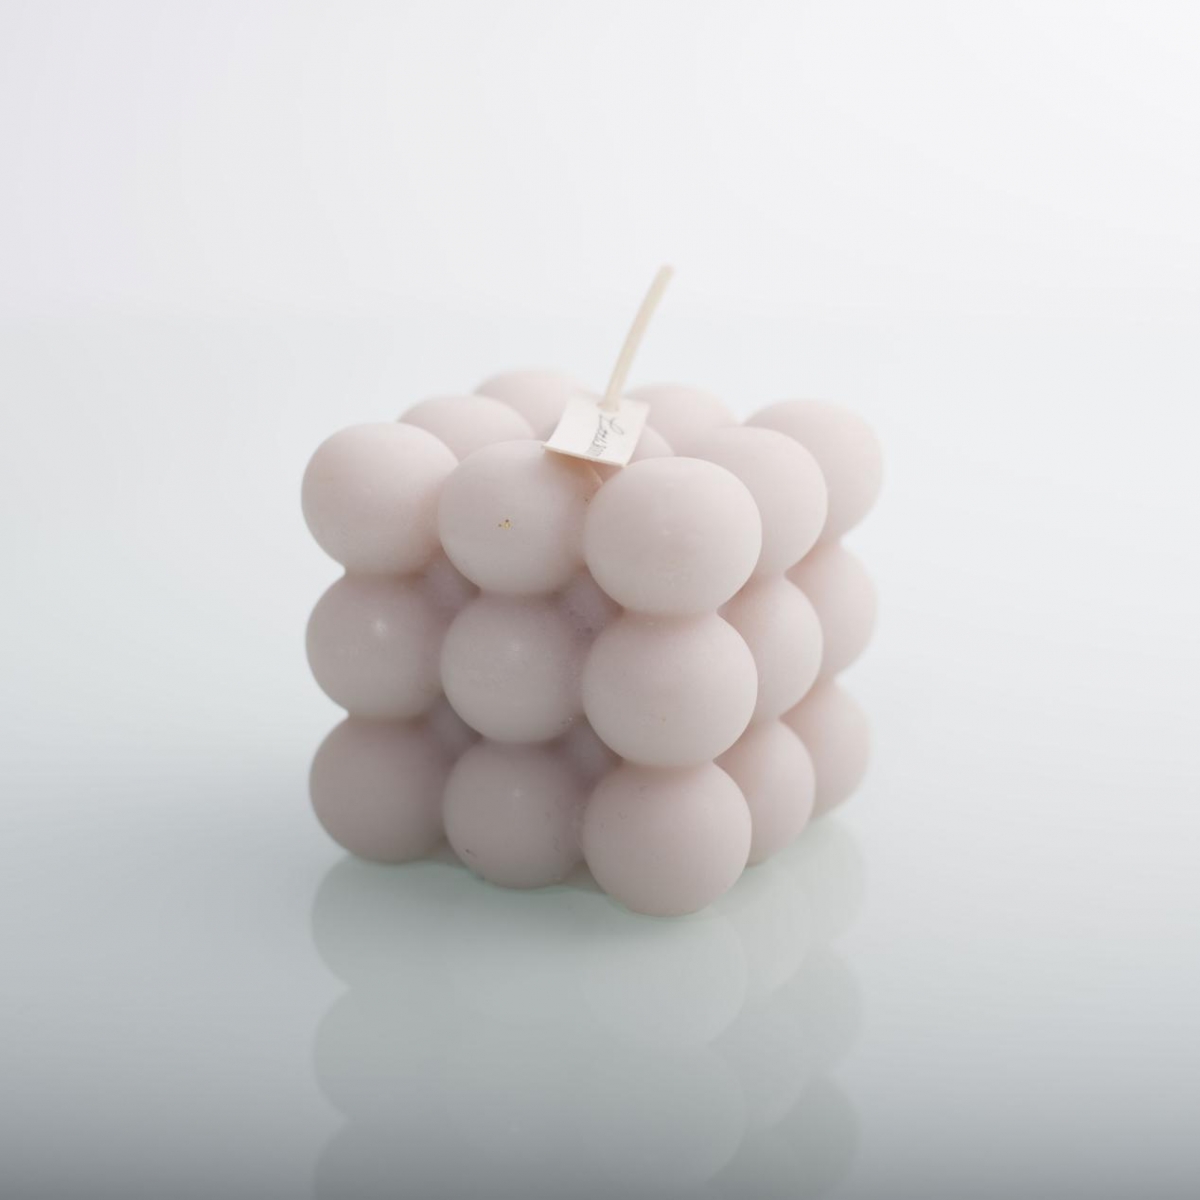 Bubble Cube Soy Candles：Soy Wax , Cream Scents ,China Factory ,Wholesale Price-HOWCANDLE-Candles,Scented Candles,Aromatherapy Candles,Soy Candles,Vegan Candles,Jar Candles,Pillar Candles,Candle Gift Sets,Essential Oils,Reed Diffuser,Candle Holder,